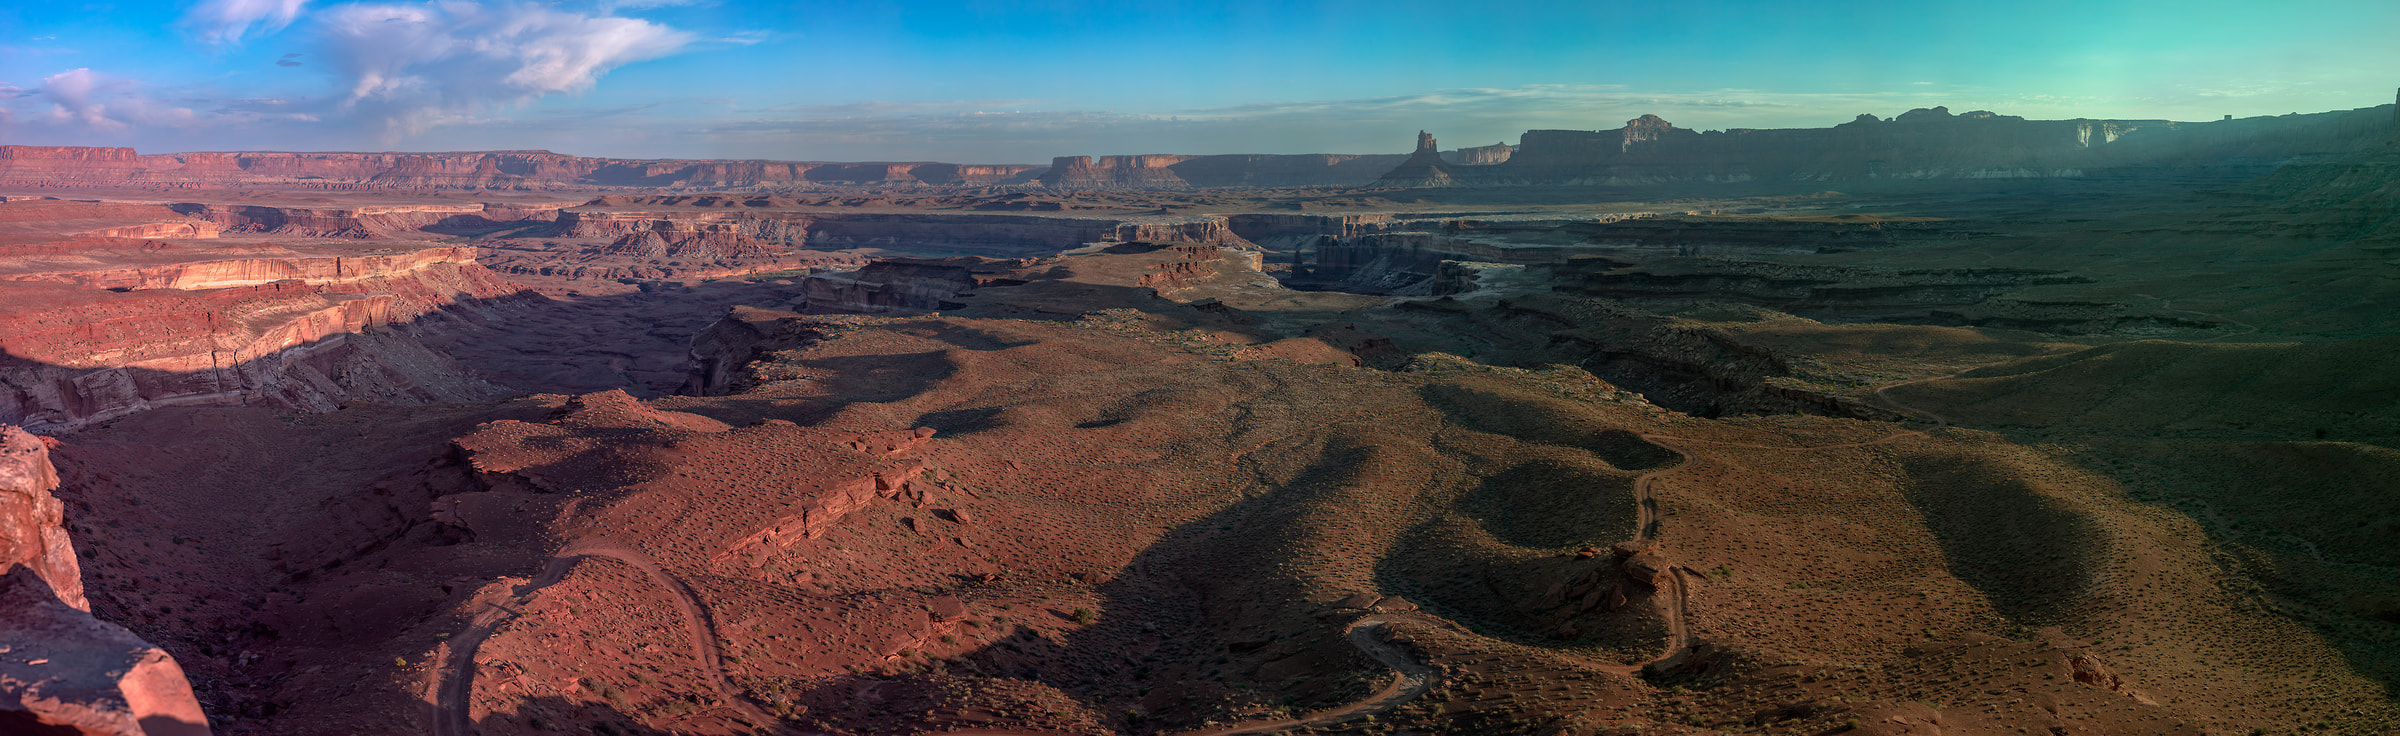 3,722 megapixels! A very high resolution panorama photo of Canyonlands National Park; landscape photograph created by John Freeman in Murphy Hogsback, White Rim Trail, Canyonlands National Park, Utah.